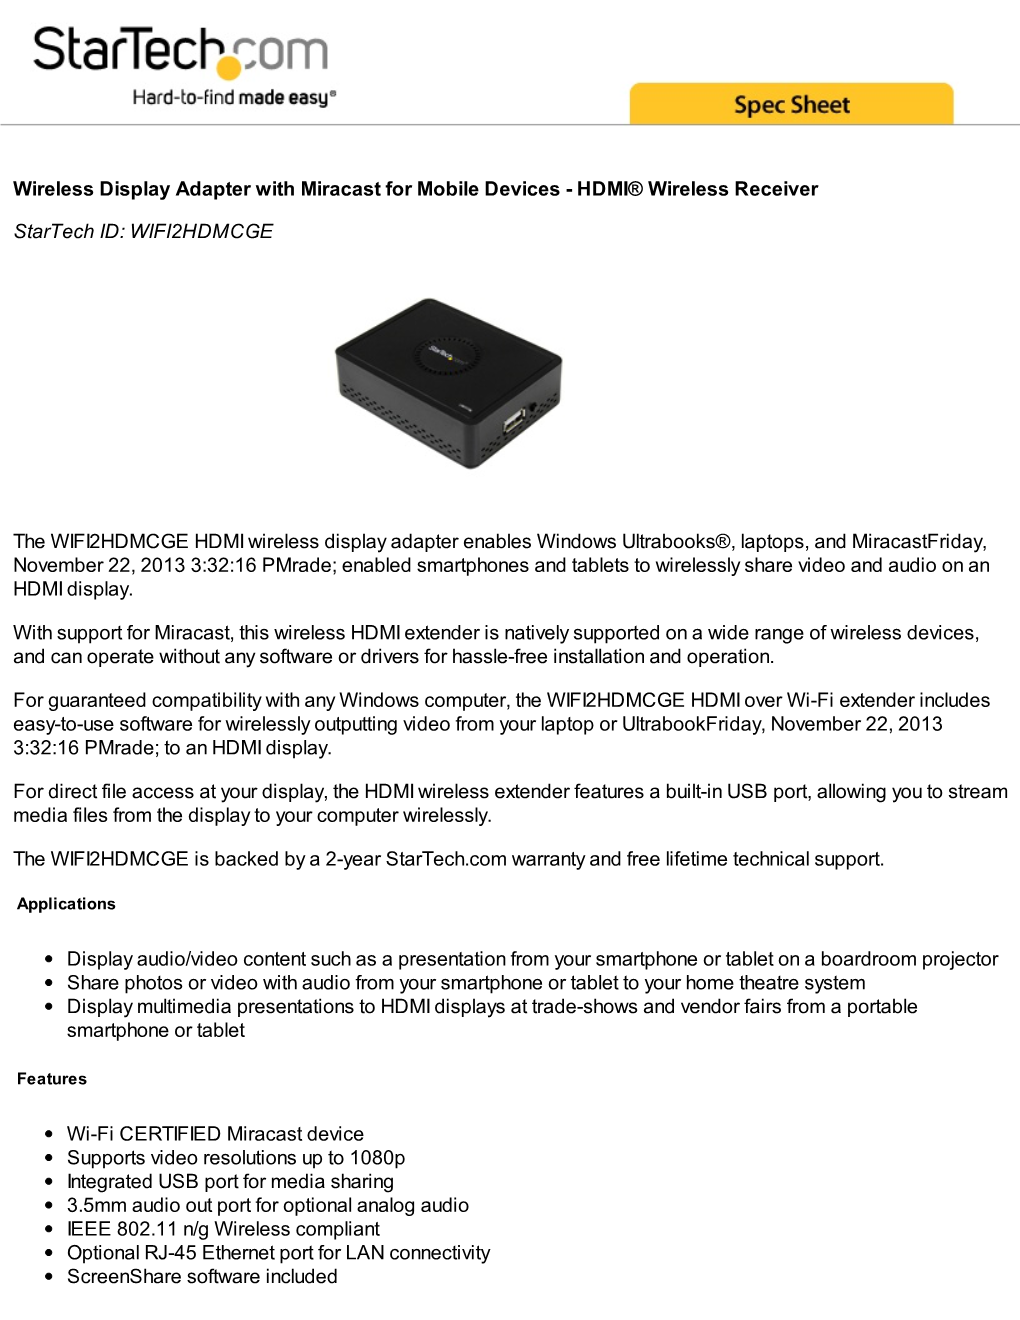 Wireless Display Adapter with Miracast for Mobile Devices - HDMI® Wireless Receiver